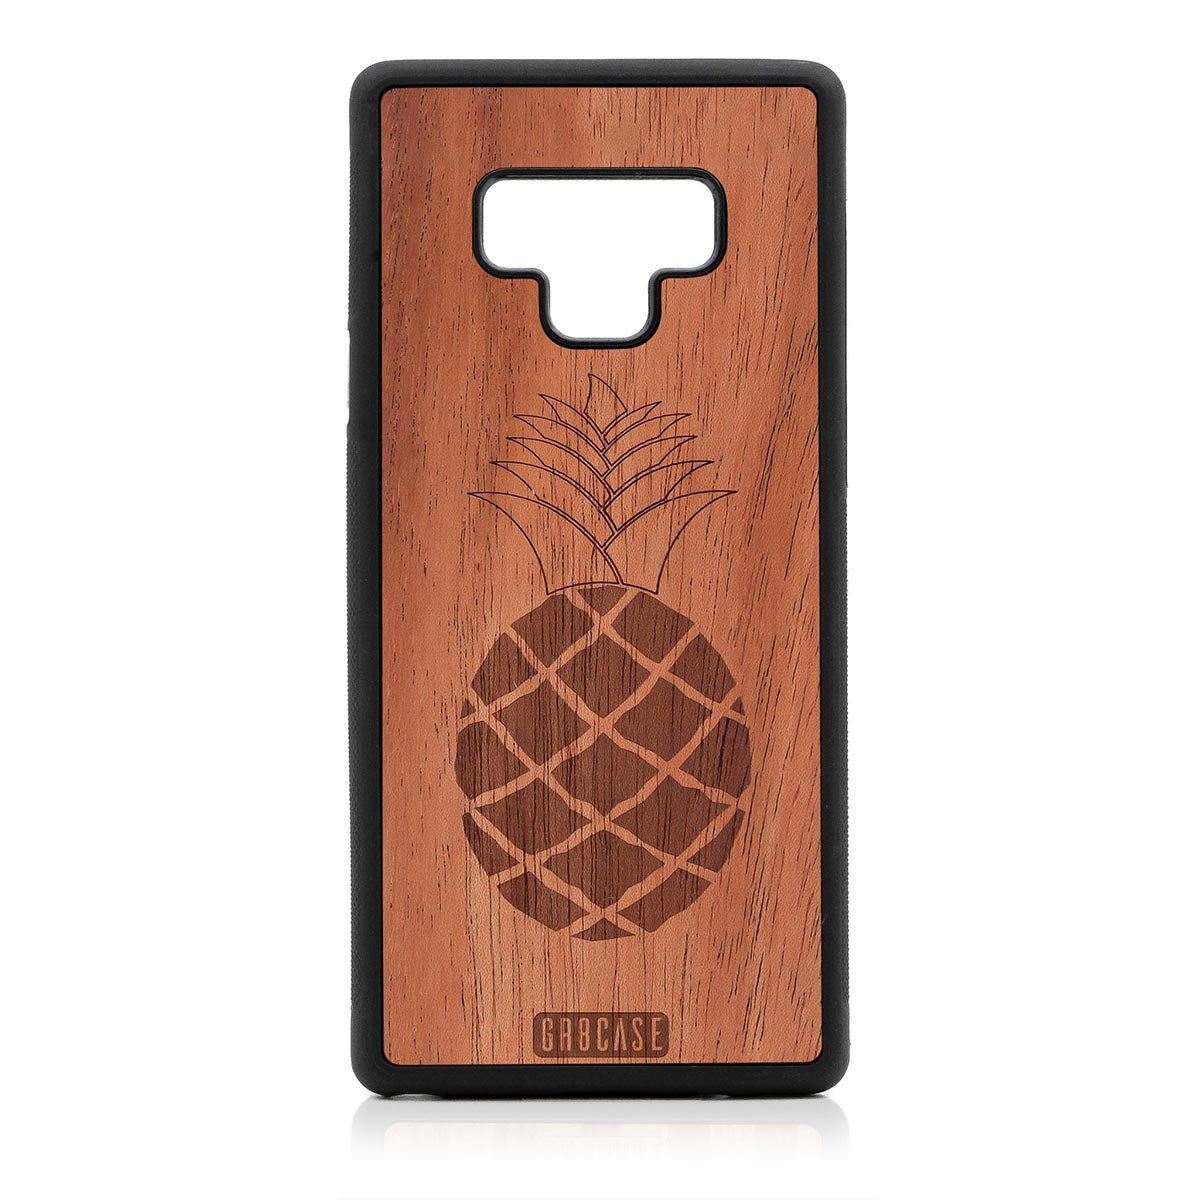 Pineapple Design Wood Case Samsung Galaxy Note 9 by GR8CASE